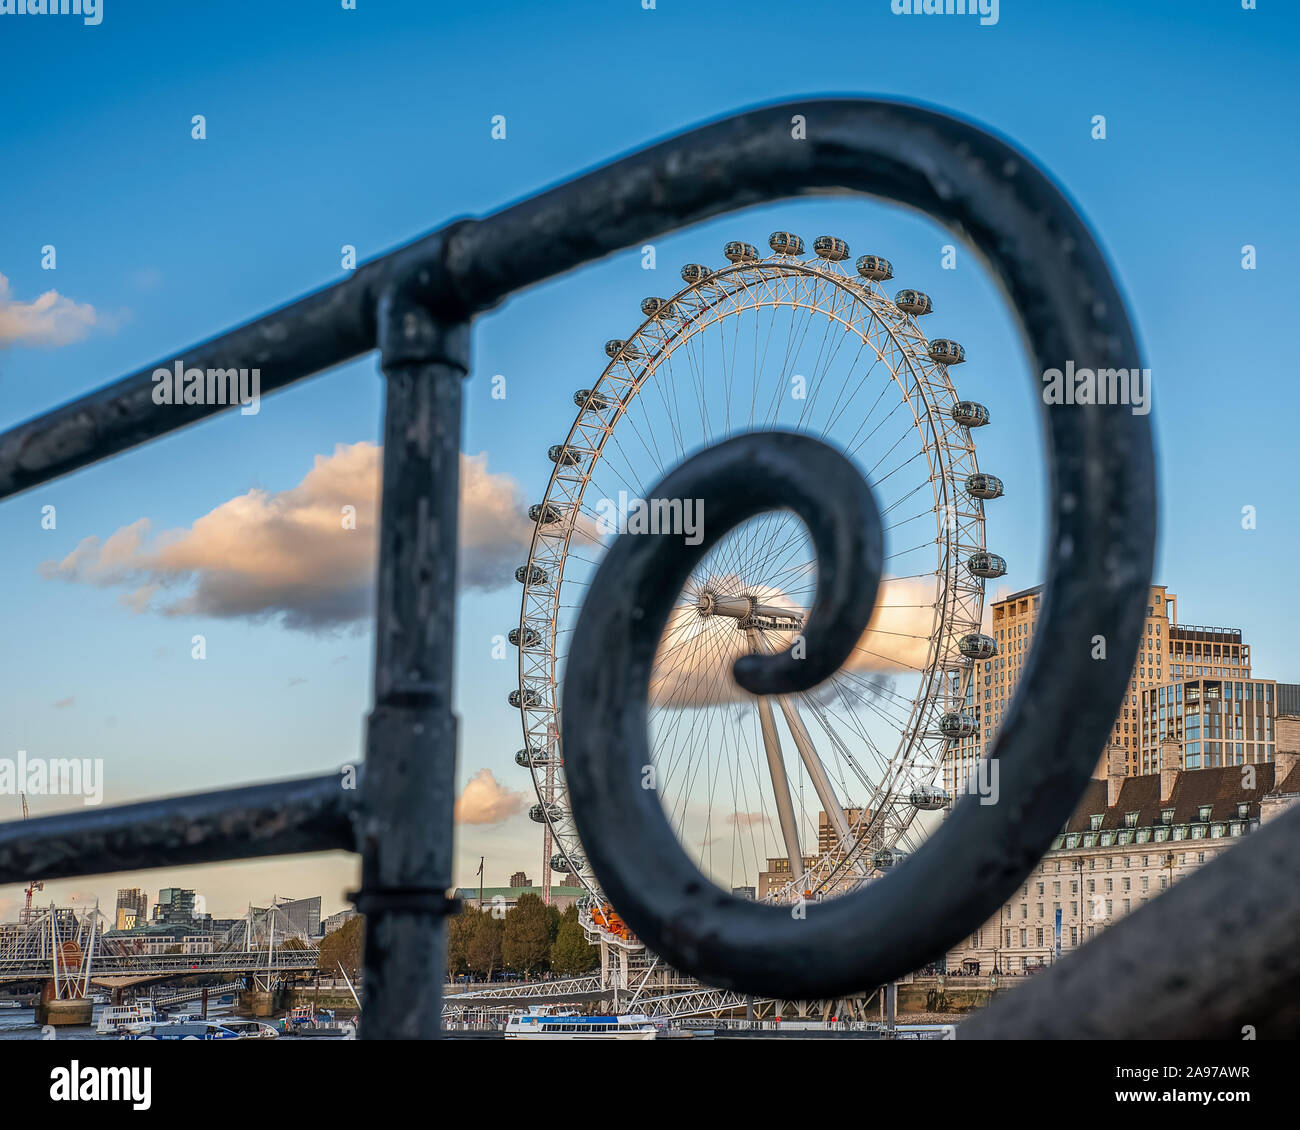 The Coca-cola London eye. The London eye with spiral handrail. Fantastic view, colorful autumn trees and blue sky with clouds. Stock Photo